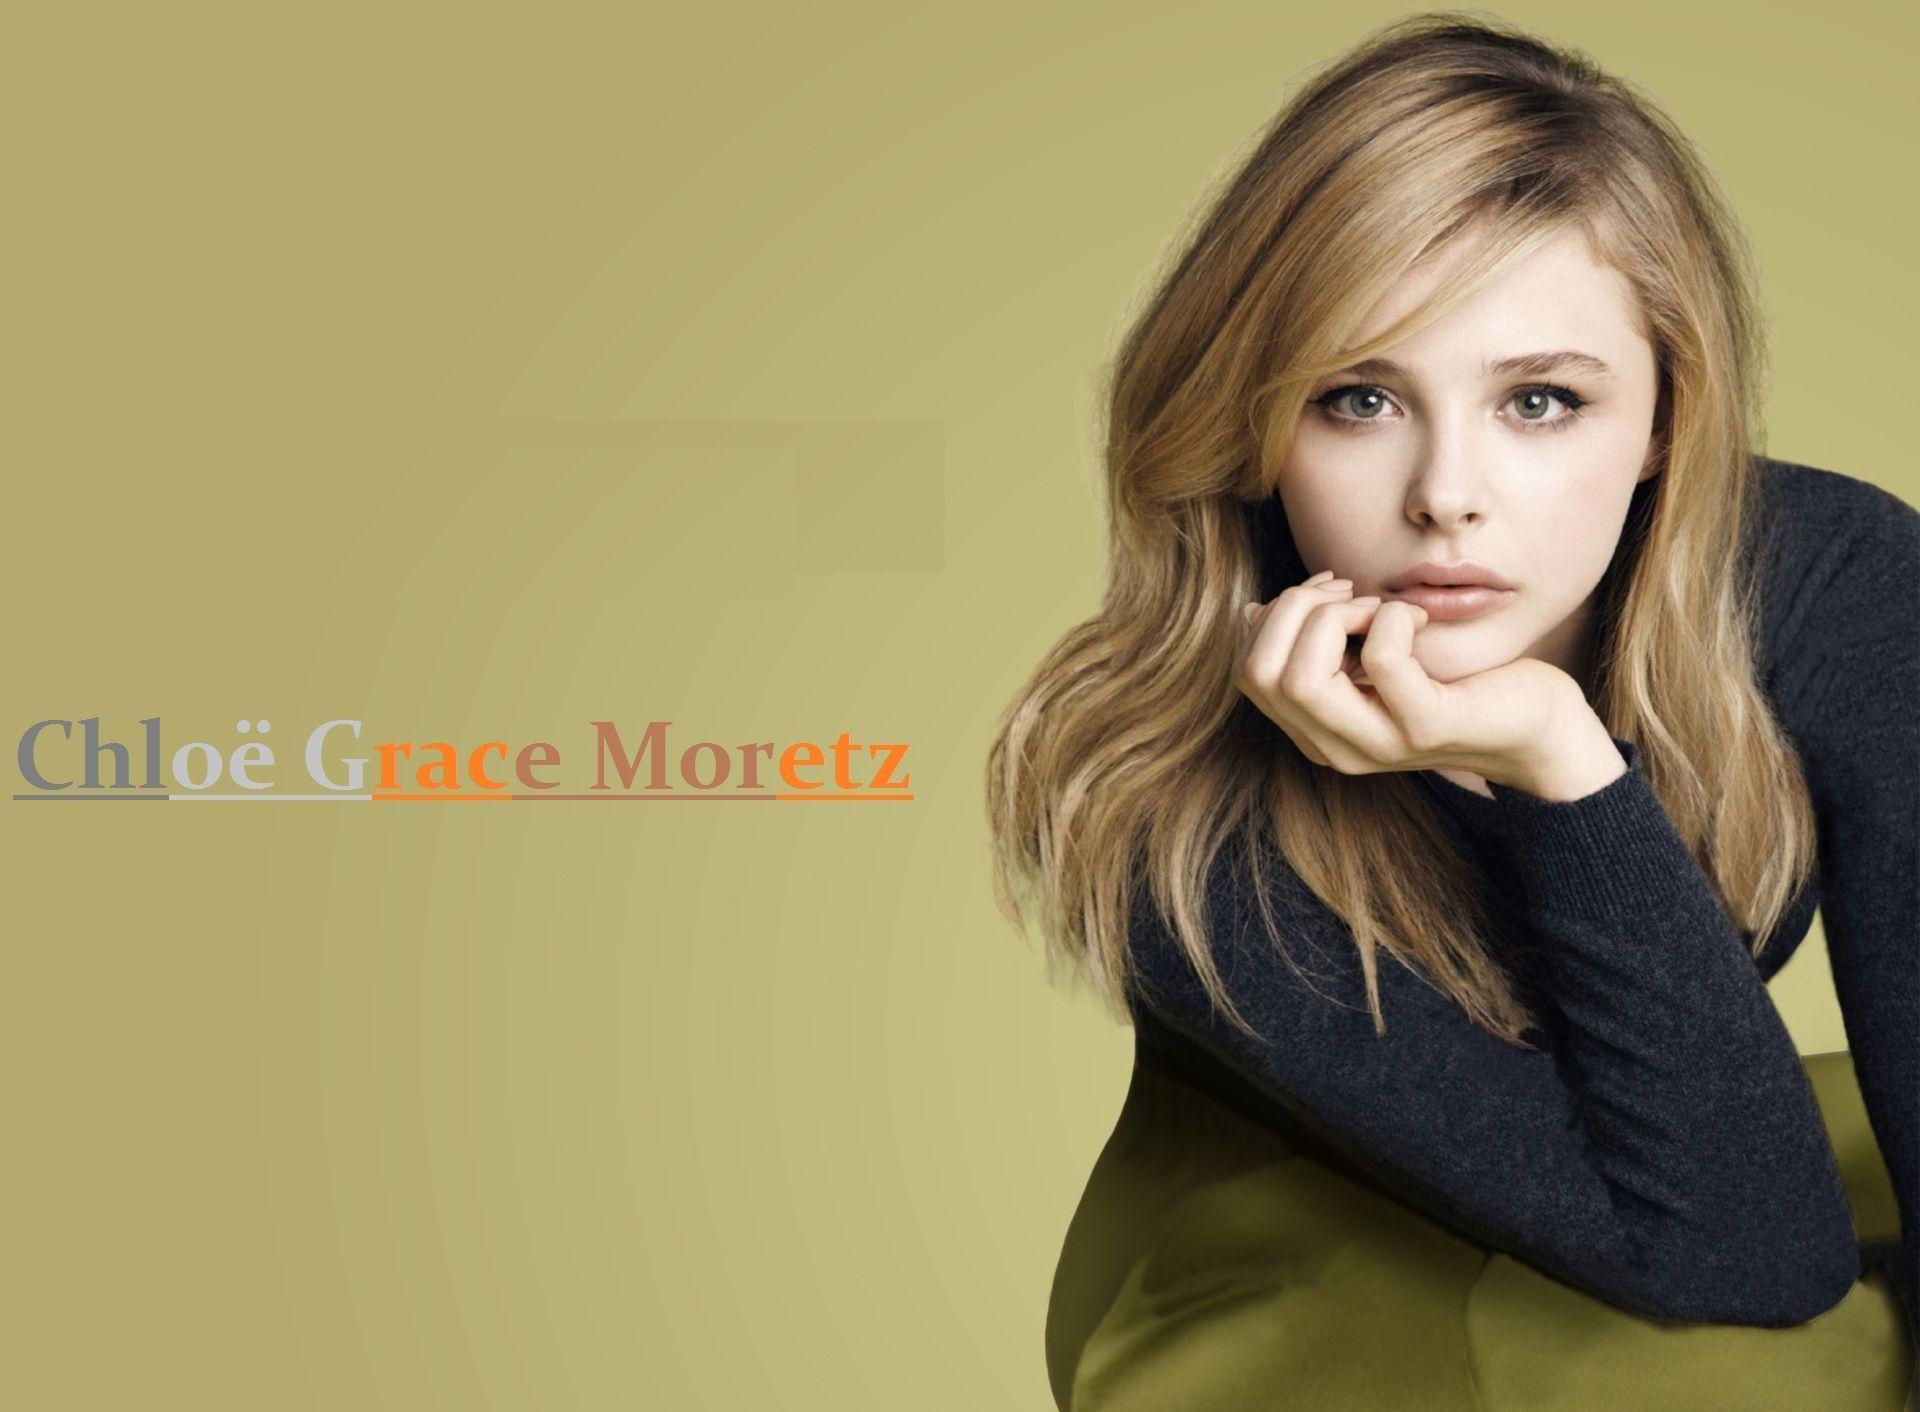 Chloe Grace Moretz HD Wallpaper and Picture Download